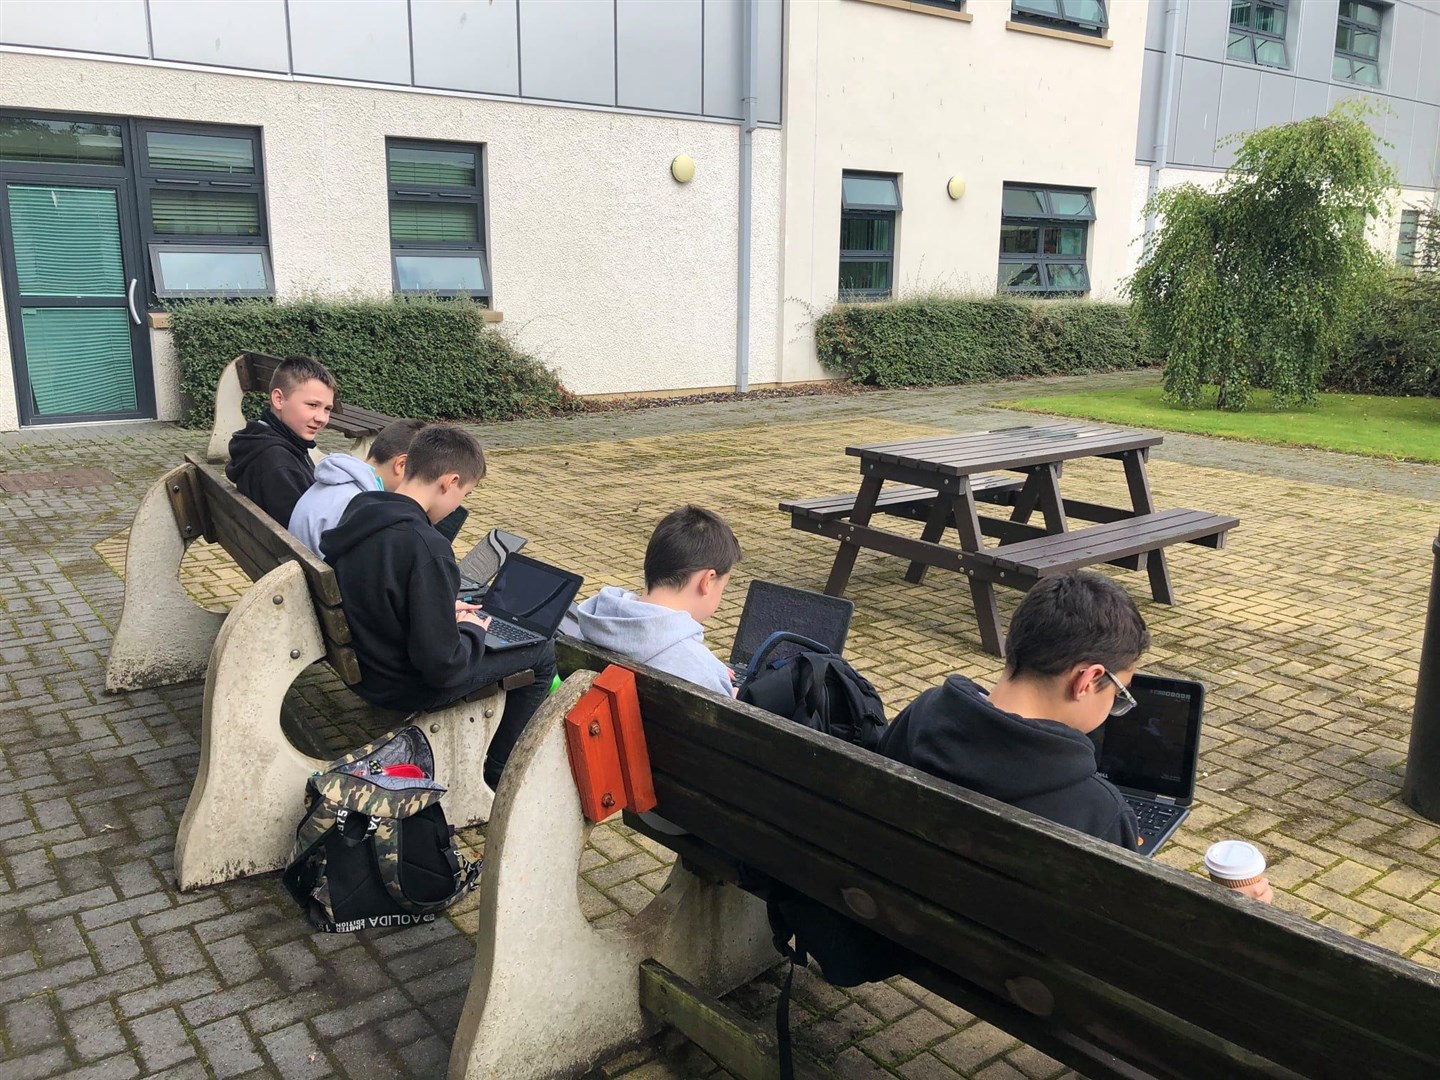 Dingwall Academy has paid tribute to its S1 intake for meeting the tough challege of adapting to a new school and the coronavirus restrictions. Picture: Dingwall Academy